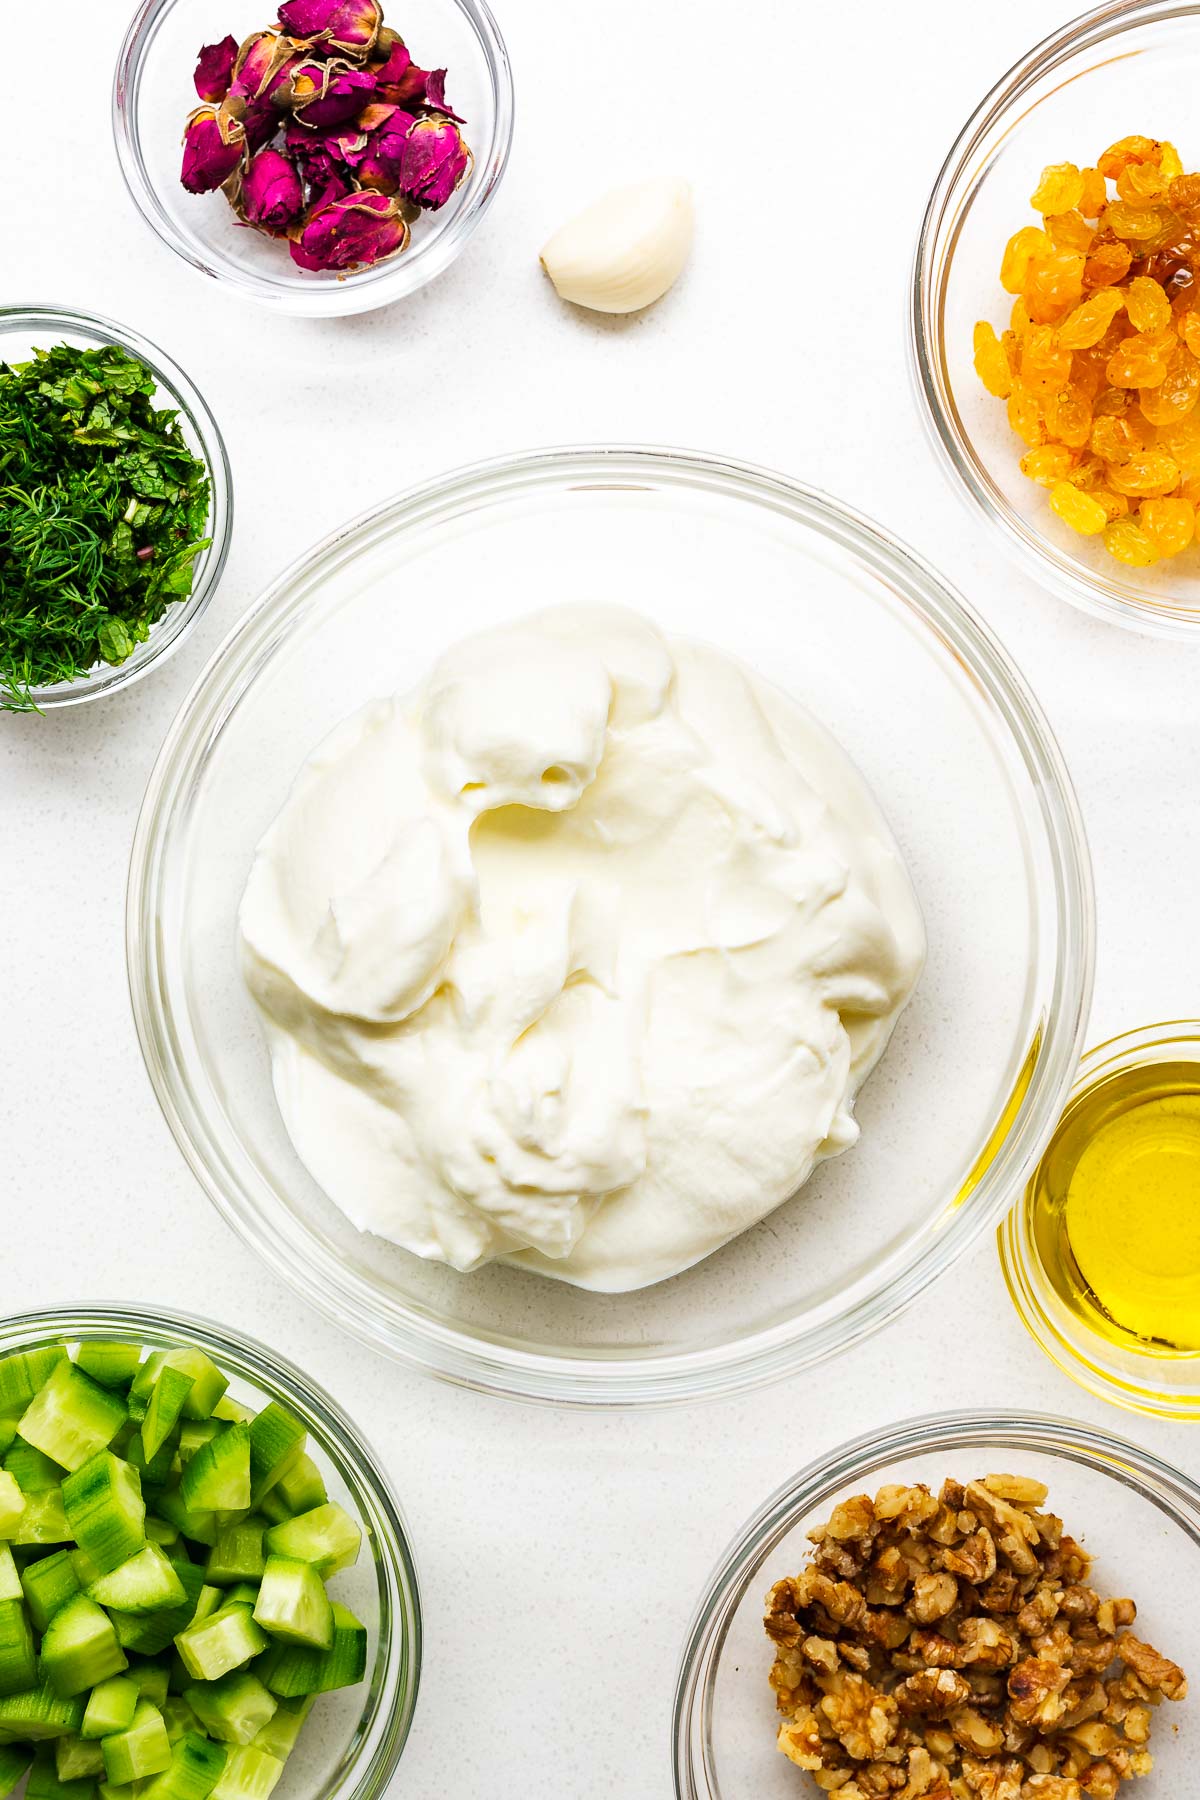 Ingredients for Persian cucumber yoghurt in small glass bowls viewed from above.